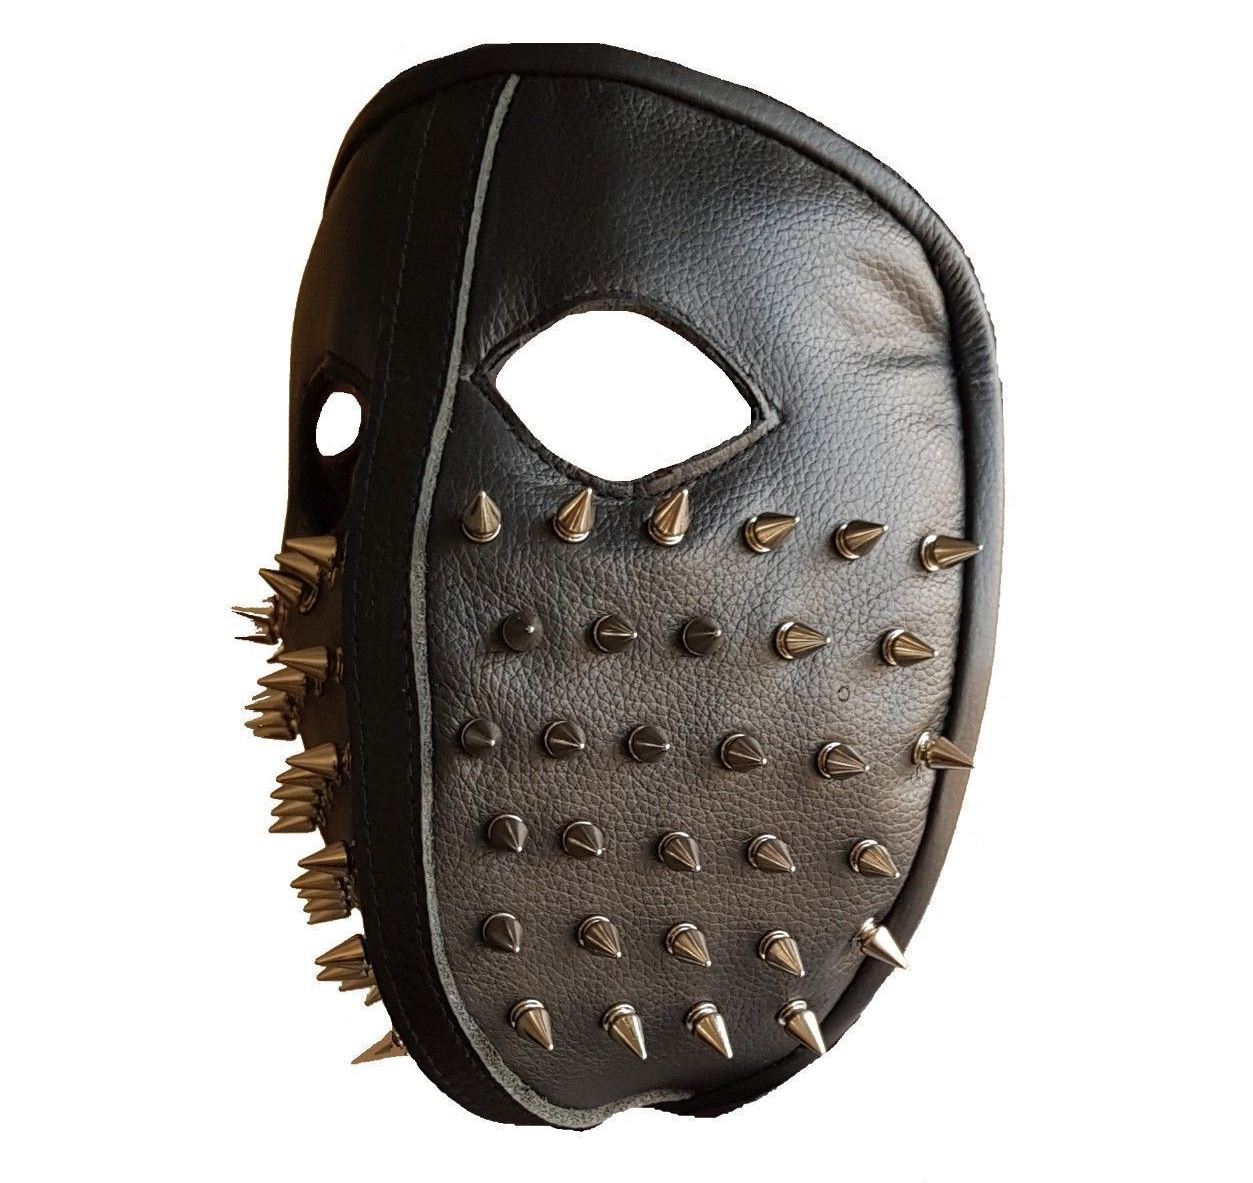 Men Black Leather Full Face Spiked Mask Masquerade Cosplay (FREE P&P IN UK)